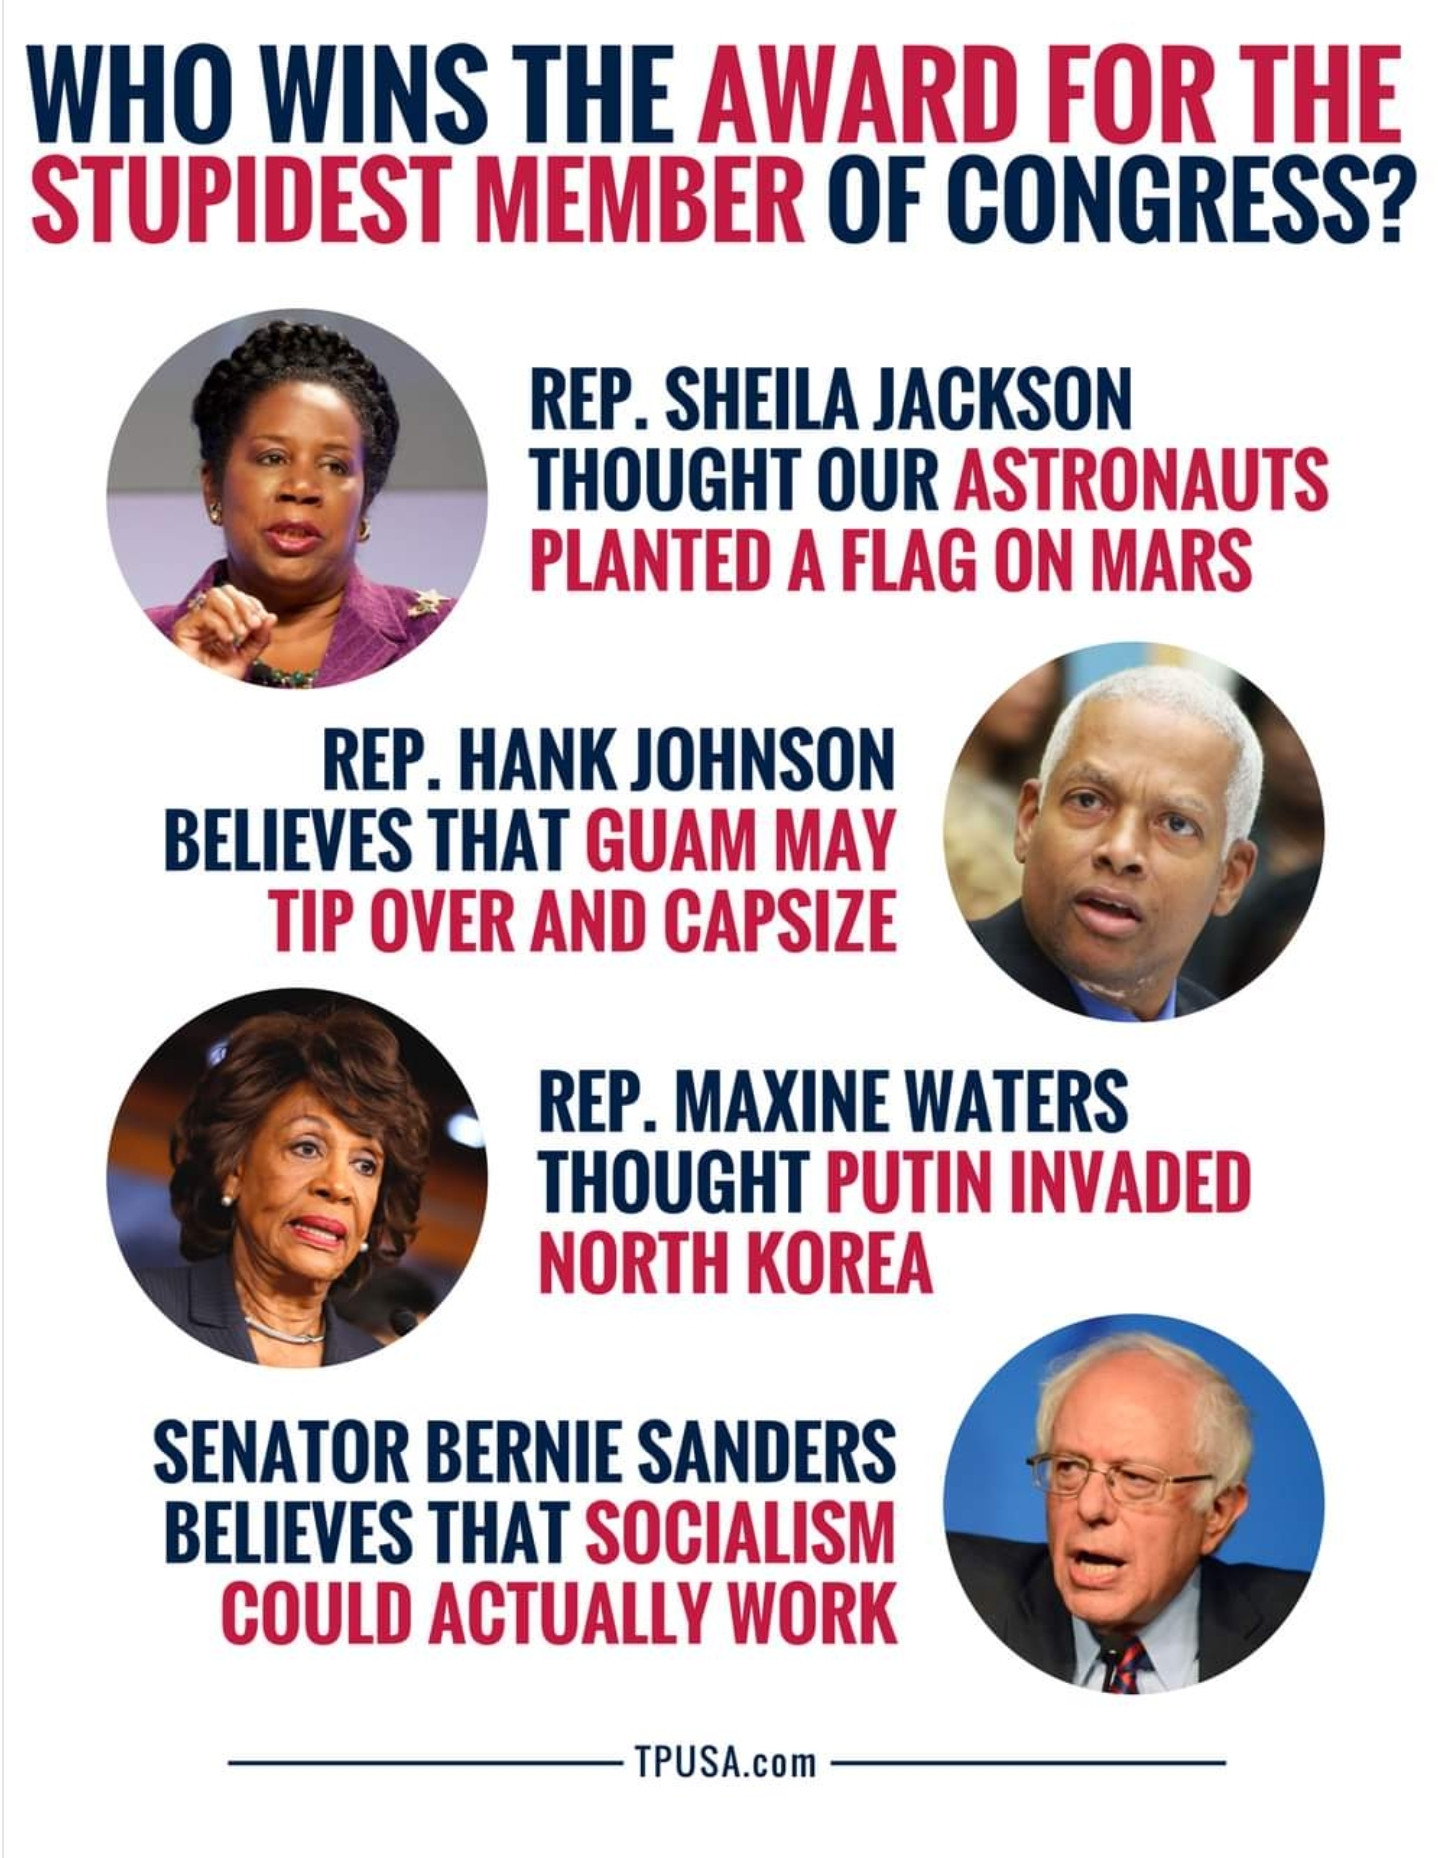 dumbest member of congress - Who Wins The Award For The Stupidest Member Of Congress? Rep. Sheila Jackson Thought Our Astronauts Planted A Flag On Mars Rep. Hank Johnson Believes That Guam May Tip Over And Capsize Rep. Maxine Waters Thought Putin Invaded 